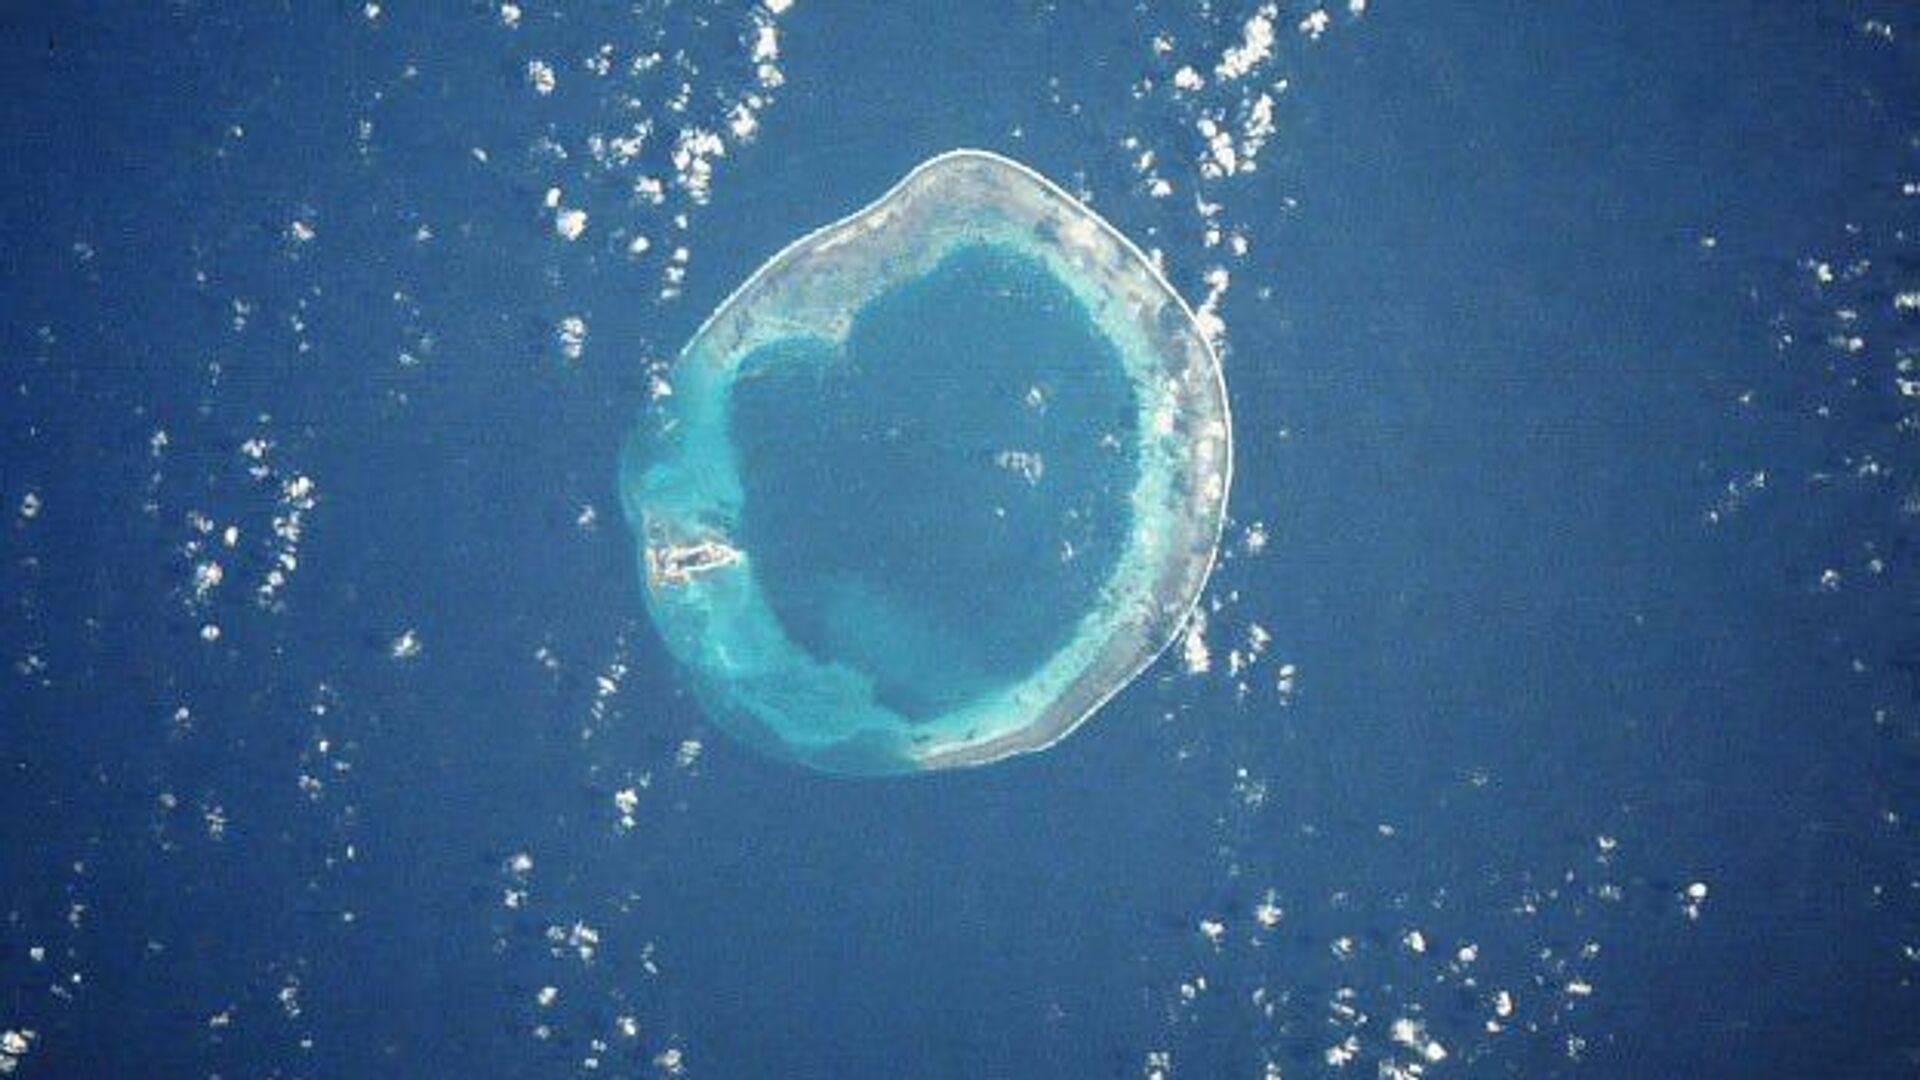 Satellite photo of Pratas (Dongsha) Island, a 590-acre island which sits 270 miles south of Taiwan and 200 miles east of China in the South China Sea. It is controlled by Taiwan. The island is on the left side - the rest is submerged reef. - Sputnik International, 1920, 22.03.2022